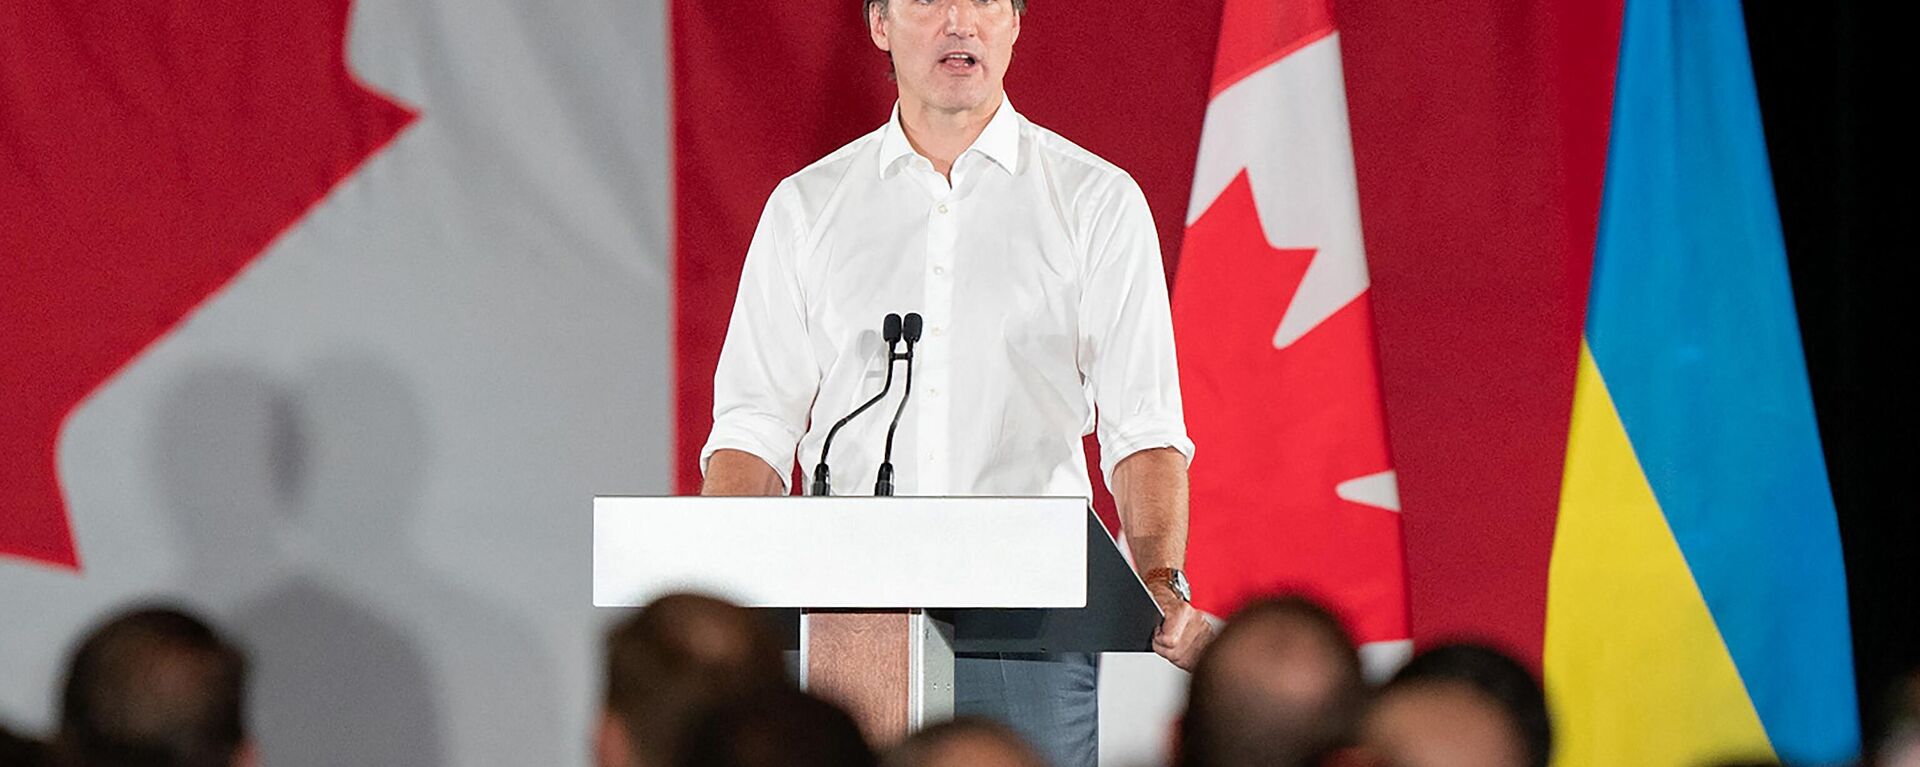 Canada's Prime Minister Justin Trudeau speaks during an event with the Ukrainian-Canadian community and Ukraine's President Volodymyr Zelensky, not pictured, in Toronto, Ontario, Canada, on September 22, 2023. Canada's prime minister said on September 25, 2023, the singling out of a Ukrainian veteran alleged to have fought for the Nazis during World War II for a standing ovation during a visit by Kyiv's leader was shameful and intolerable. The speaker of Canada's parliament, Anthony Rota, has apologized for the gaffe. ( - Sputnik भारत, 1920, 26.09.2023